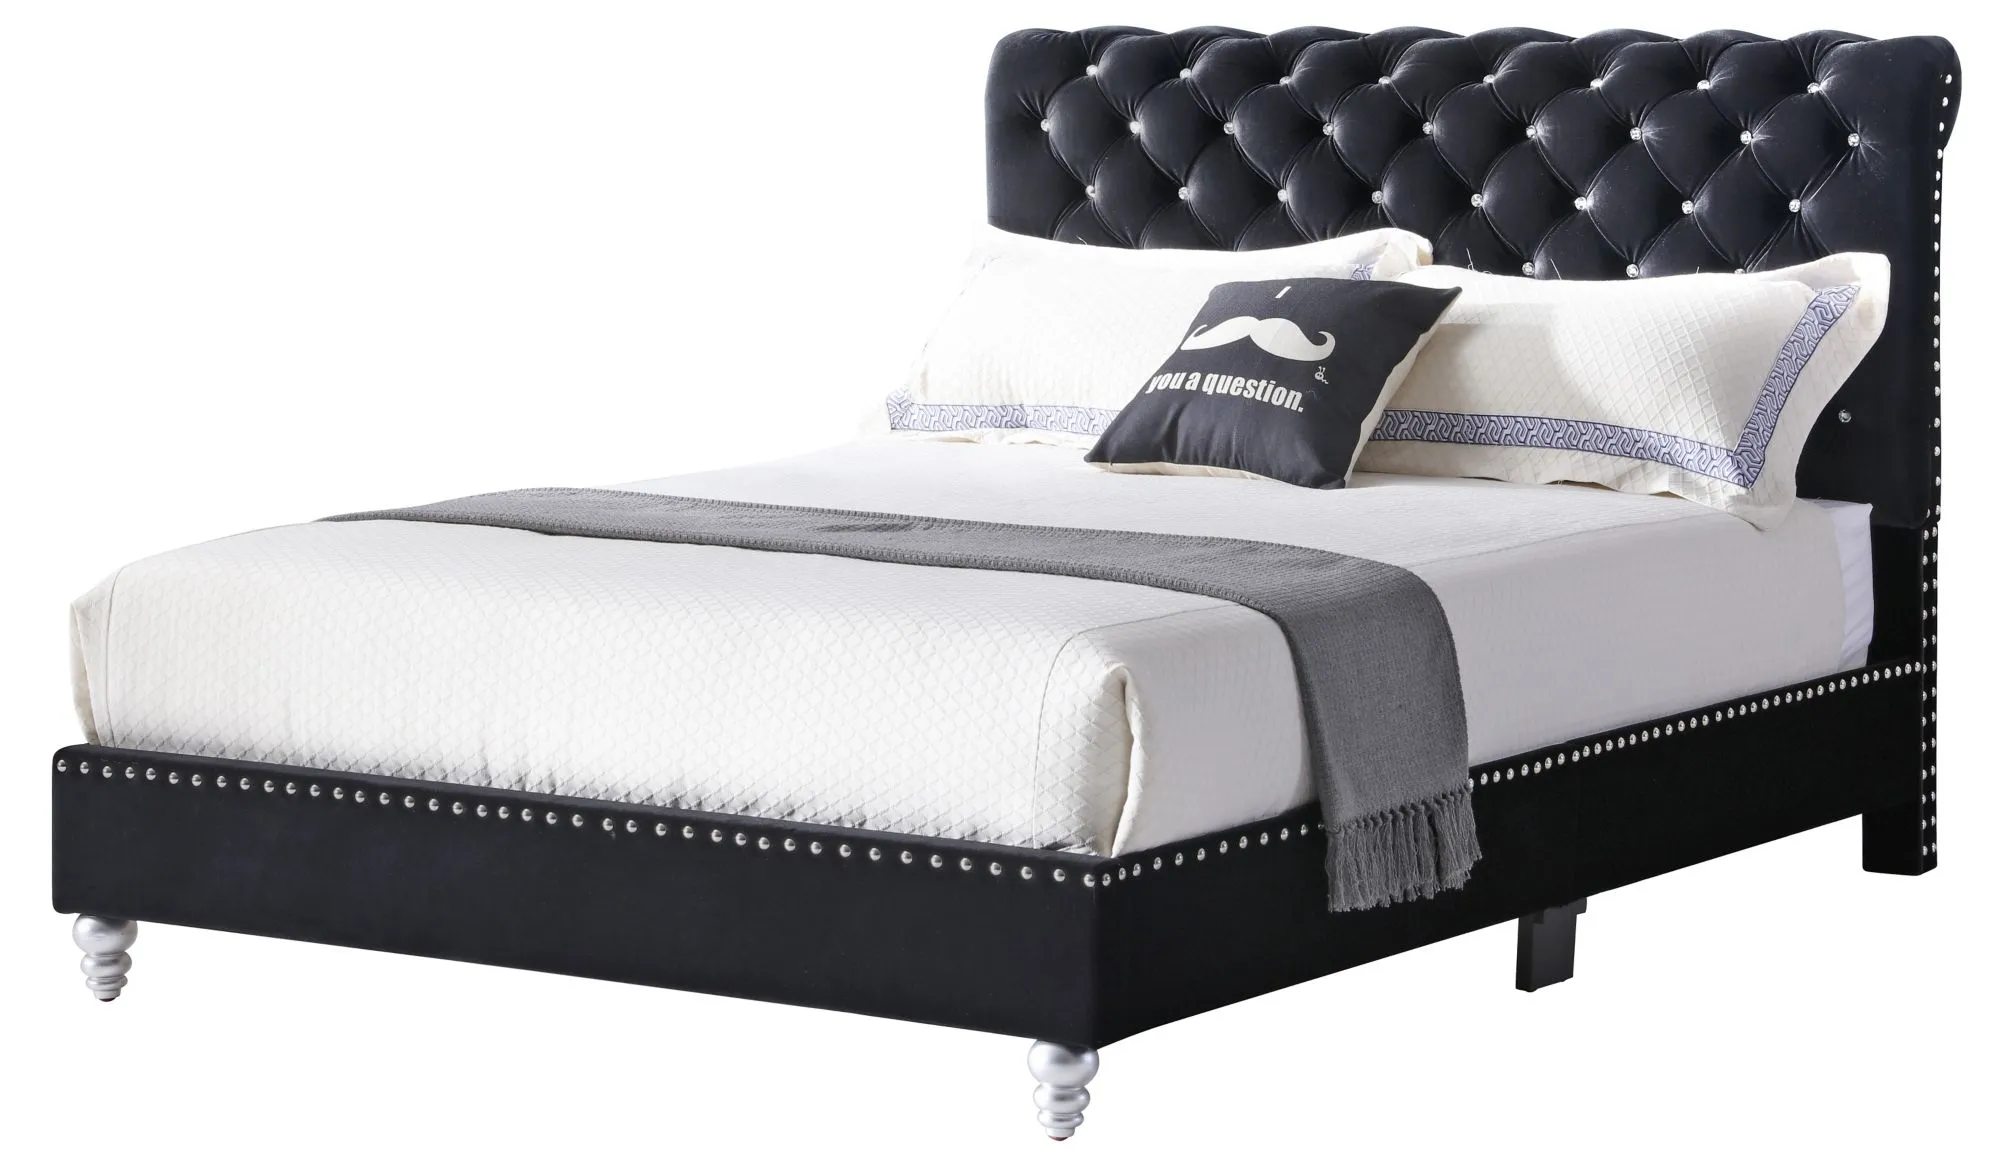 Maxx Upholstered Sleigh Bed in Black by Glory Furniture